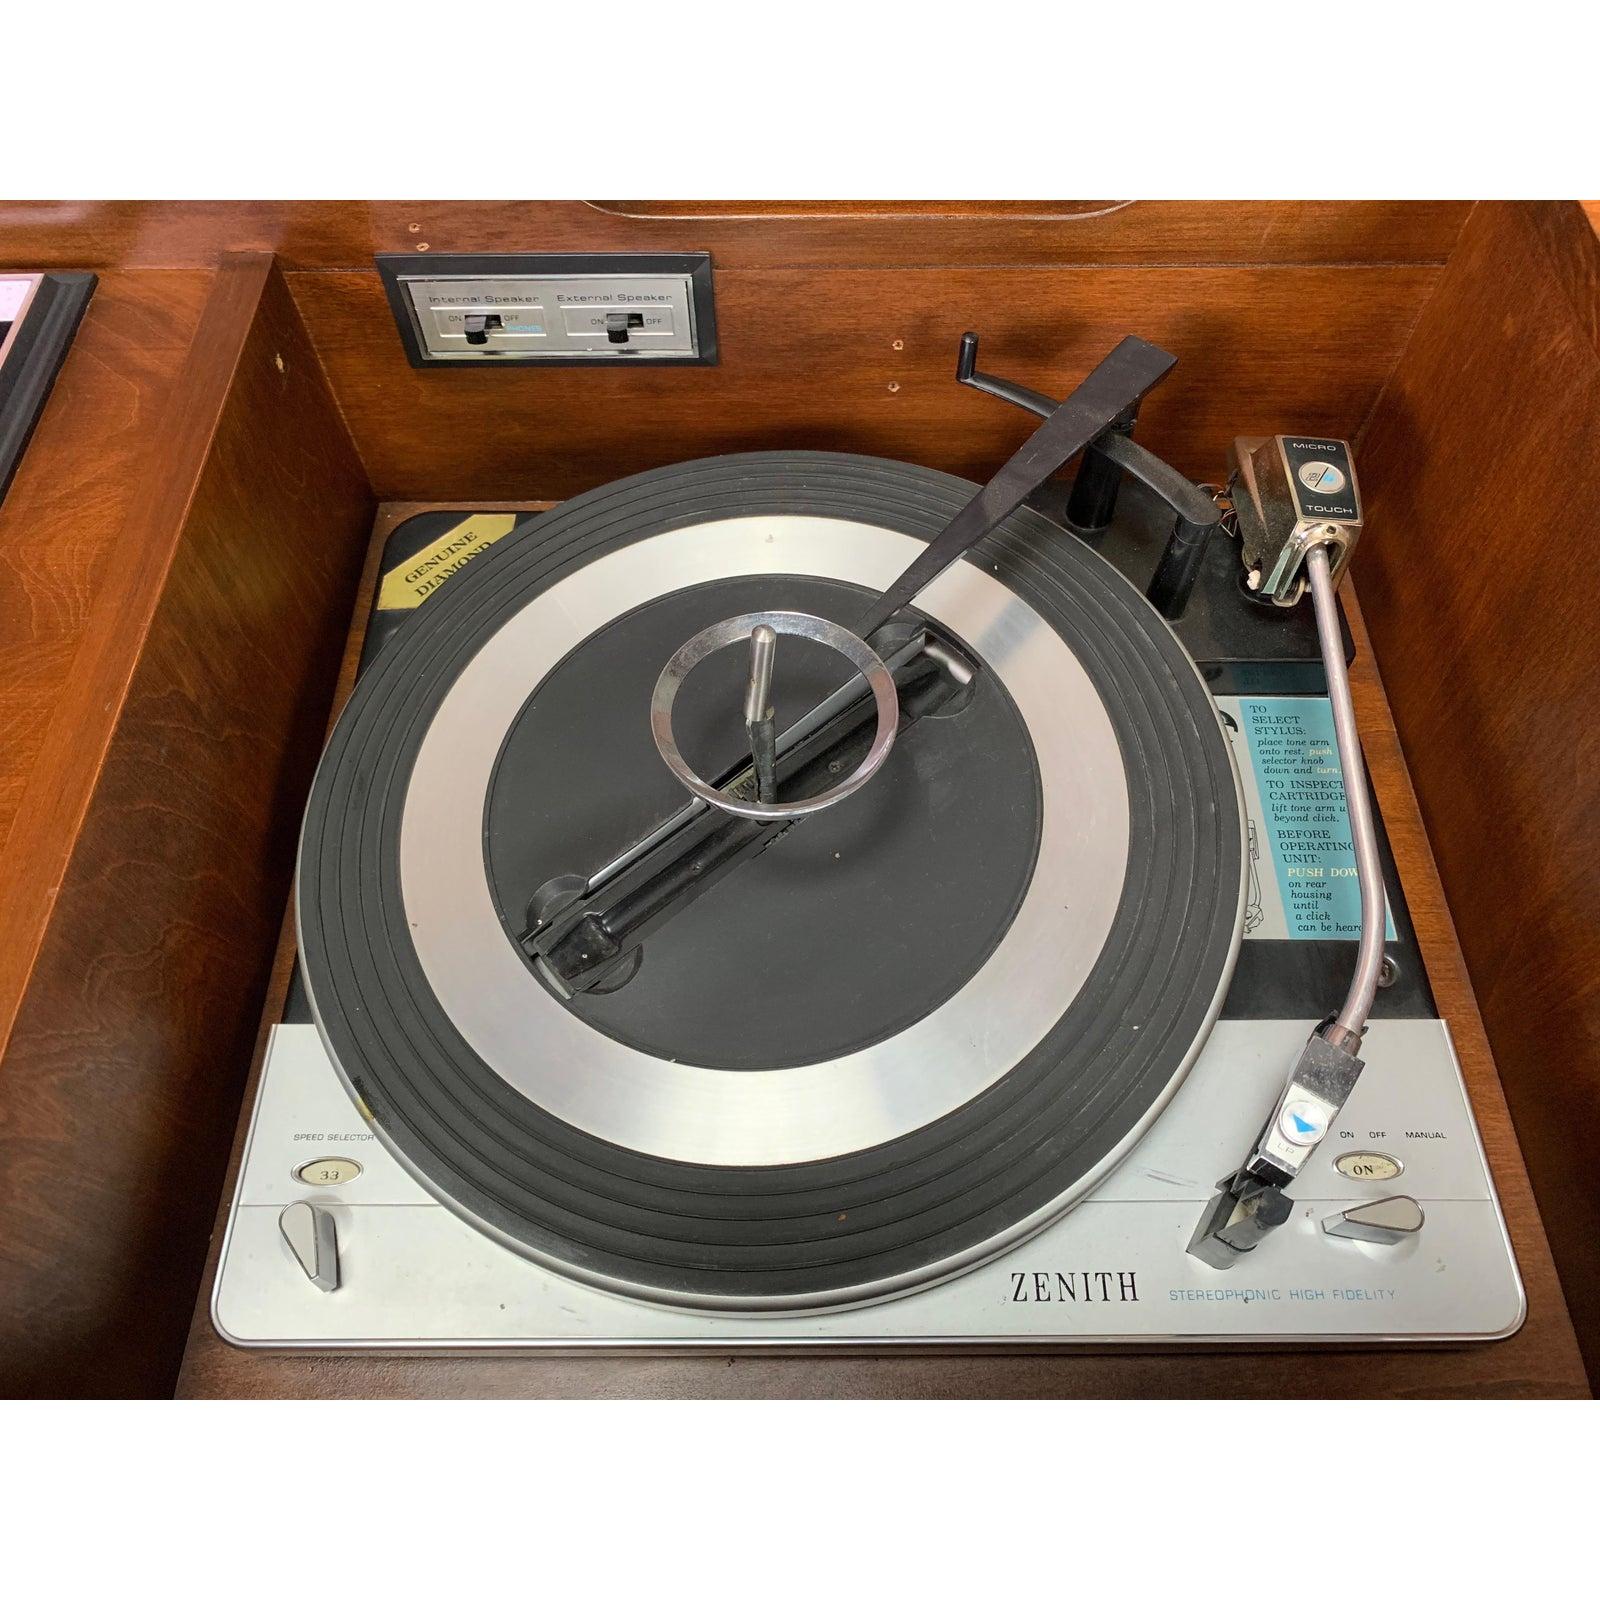 Here is an exceptional audio jewel from the 1960s, the model 